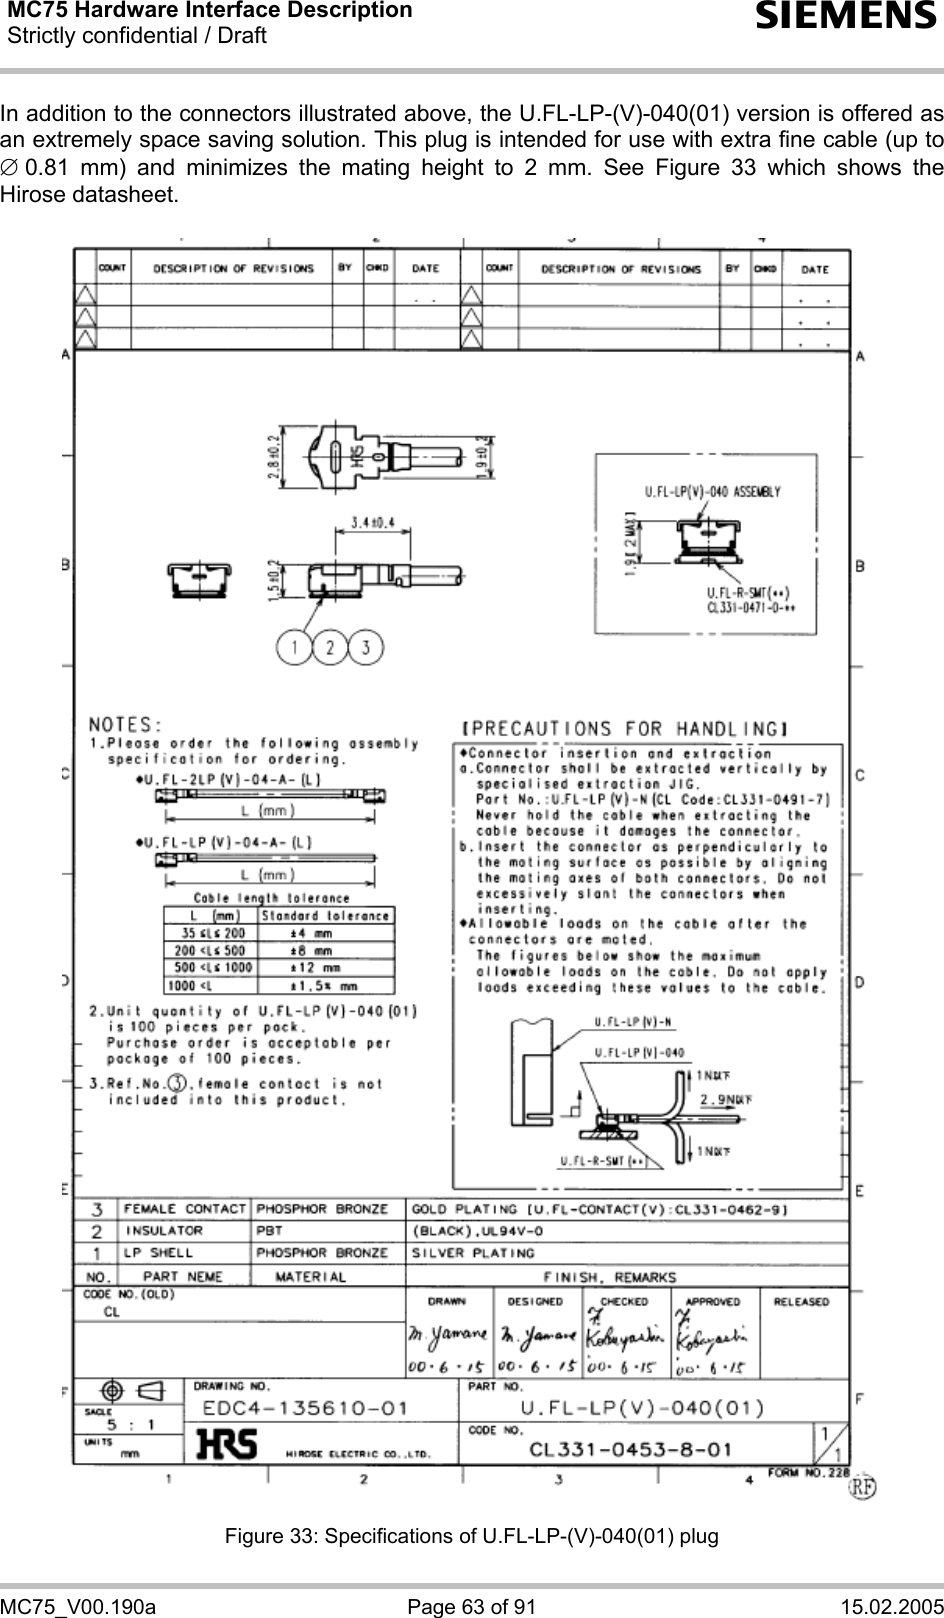 MC75 Hardware Interface Description Strictly confidential / Draft  s MC75_V00.190a  Page 63 of 91  15.02.2005 In addition to the connectors illustrated above, the U.FL-LP-(V)-040(01) version is offered as an extremely space saving solution. This plug is intended for use with extra fine cable (up to ∅ 0.81 mm) and minimizes the mating height to 2 mm. See Figure 33 which shows the Hirose datasheet.    Figure 33: Specifications of U.FL-LP-(V)-040(01) plug 